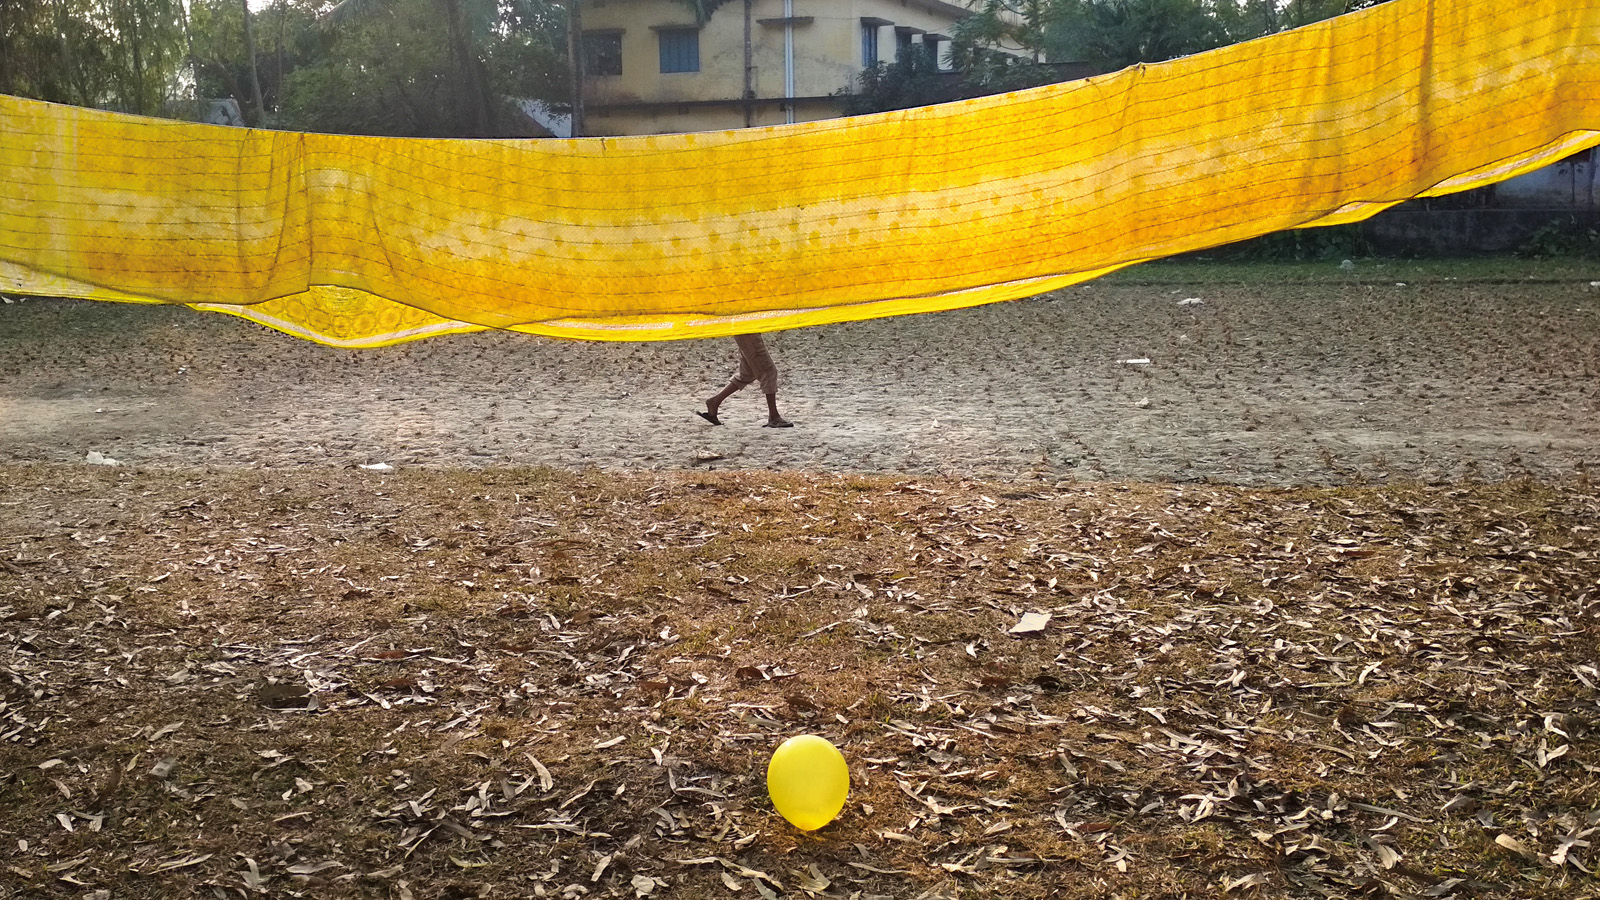 On a winter’s afternoon in 2018 in Bogura, Bangladesh, I went out for a walk with my nephew. While walking, I saw a group of toddlers playing with colorful balloons and across from them boys playing cricket. I was struck to see a bright yellow sari hanging to dry in the sun, which really drew me into to the scene. I noticed that one of the toddlers had a yellow balloon in their hand and I thought about the composition. I positioned myself and waited there for about 10 minutes before the yellow balloon got away from the kids and landed in front of me. I clicked a photo on my cell phone just before one of them ran over to pick it up.